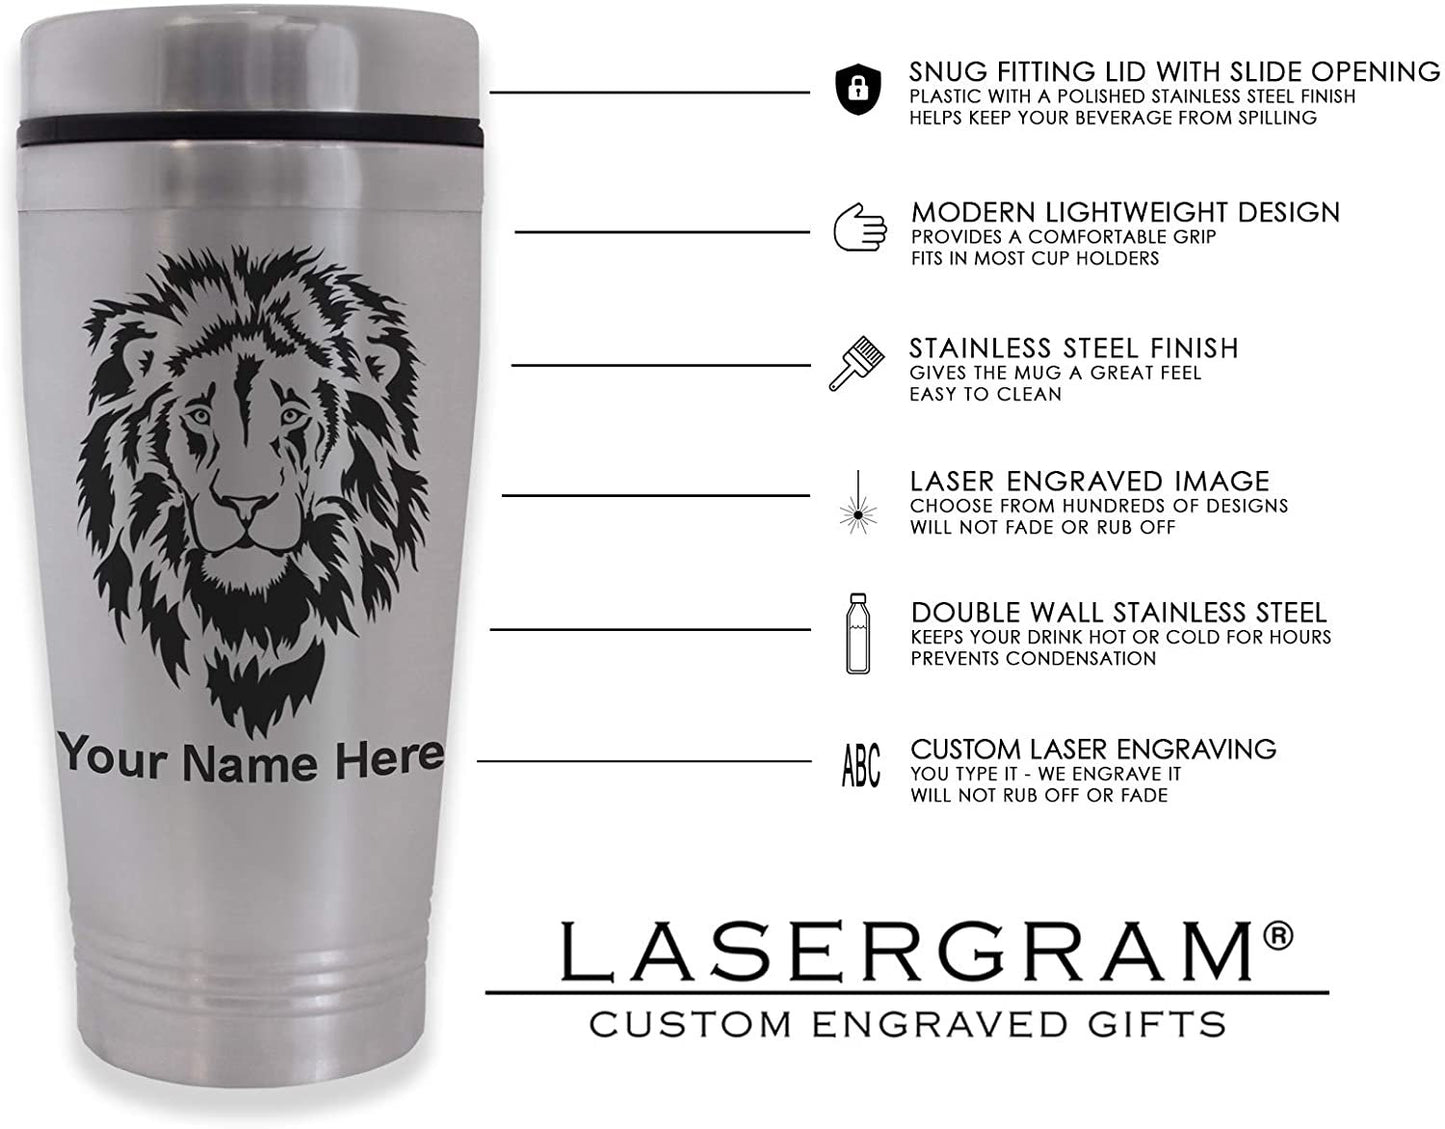 Commuter Travel Mug, Zodiac Sign Libra, Personalized Engraving Included